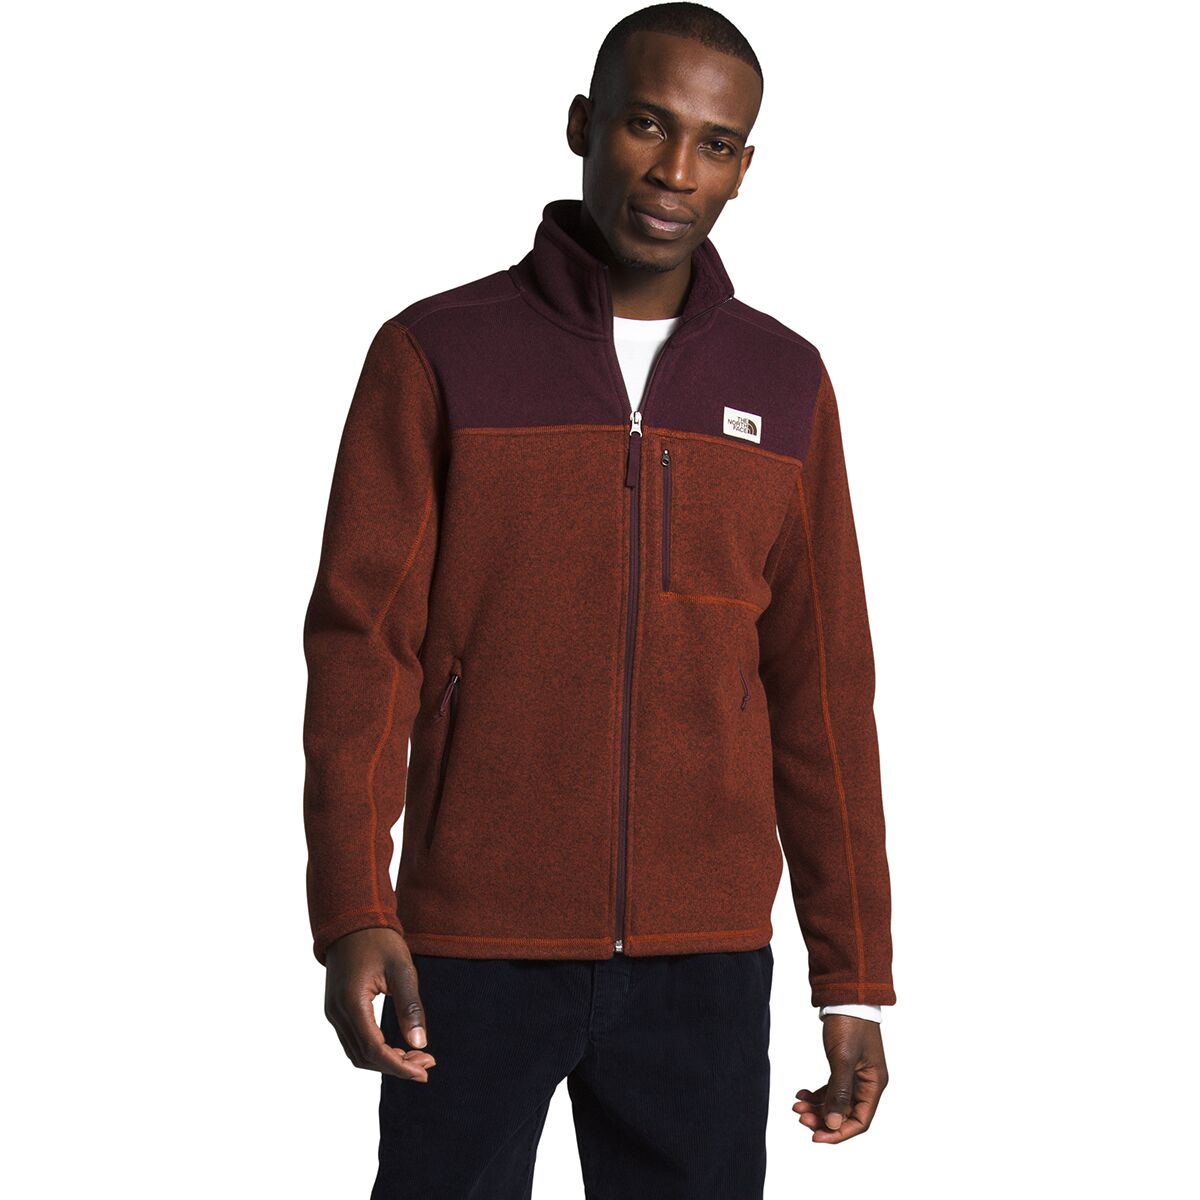 north face gordon lyons hoodie review